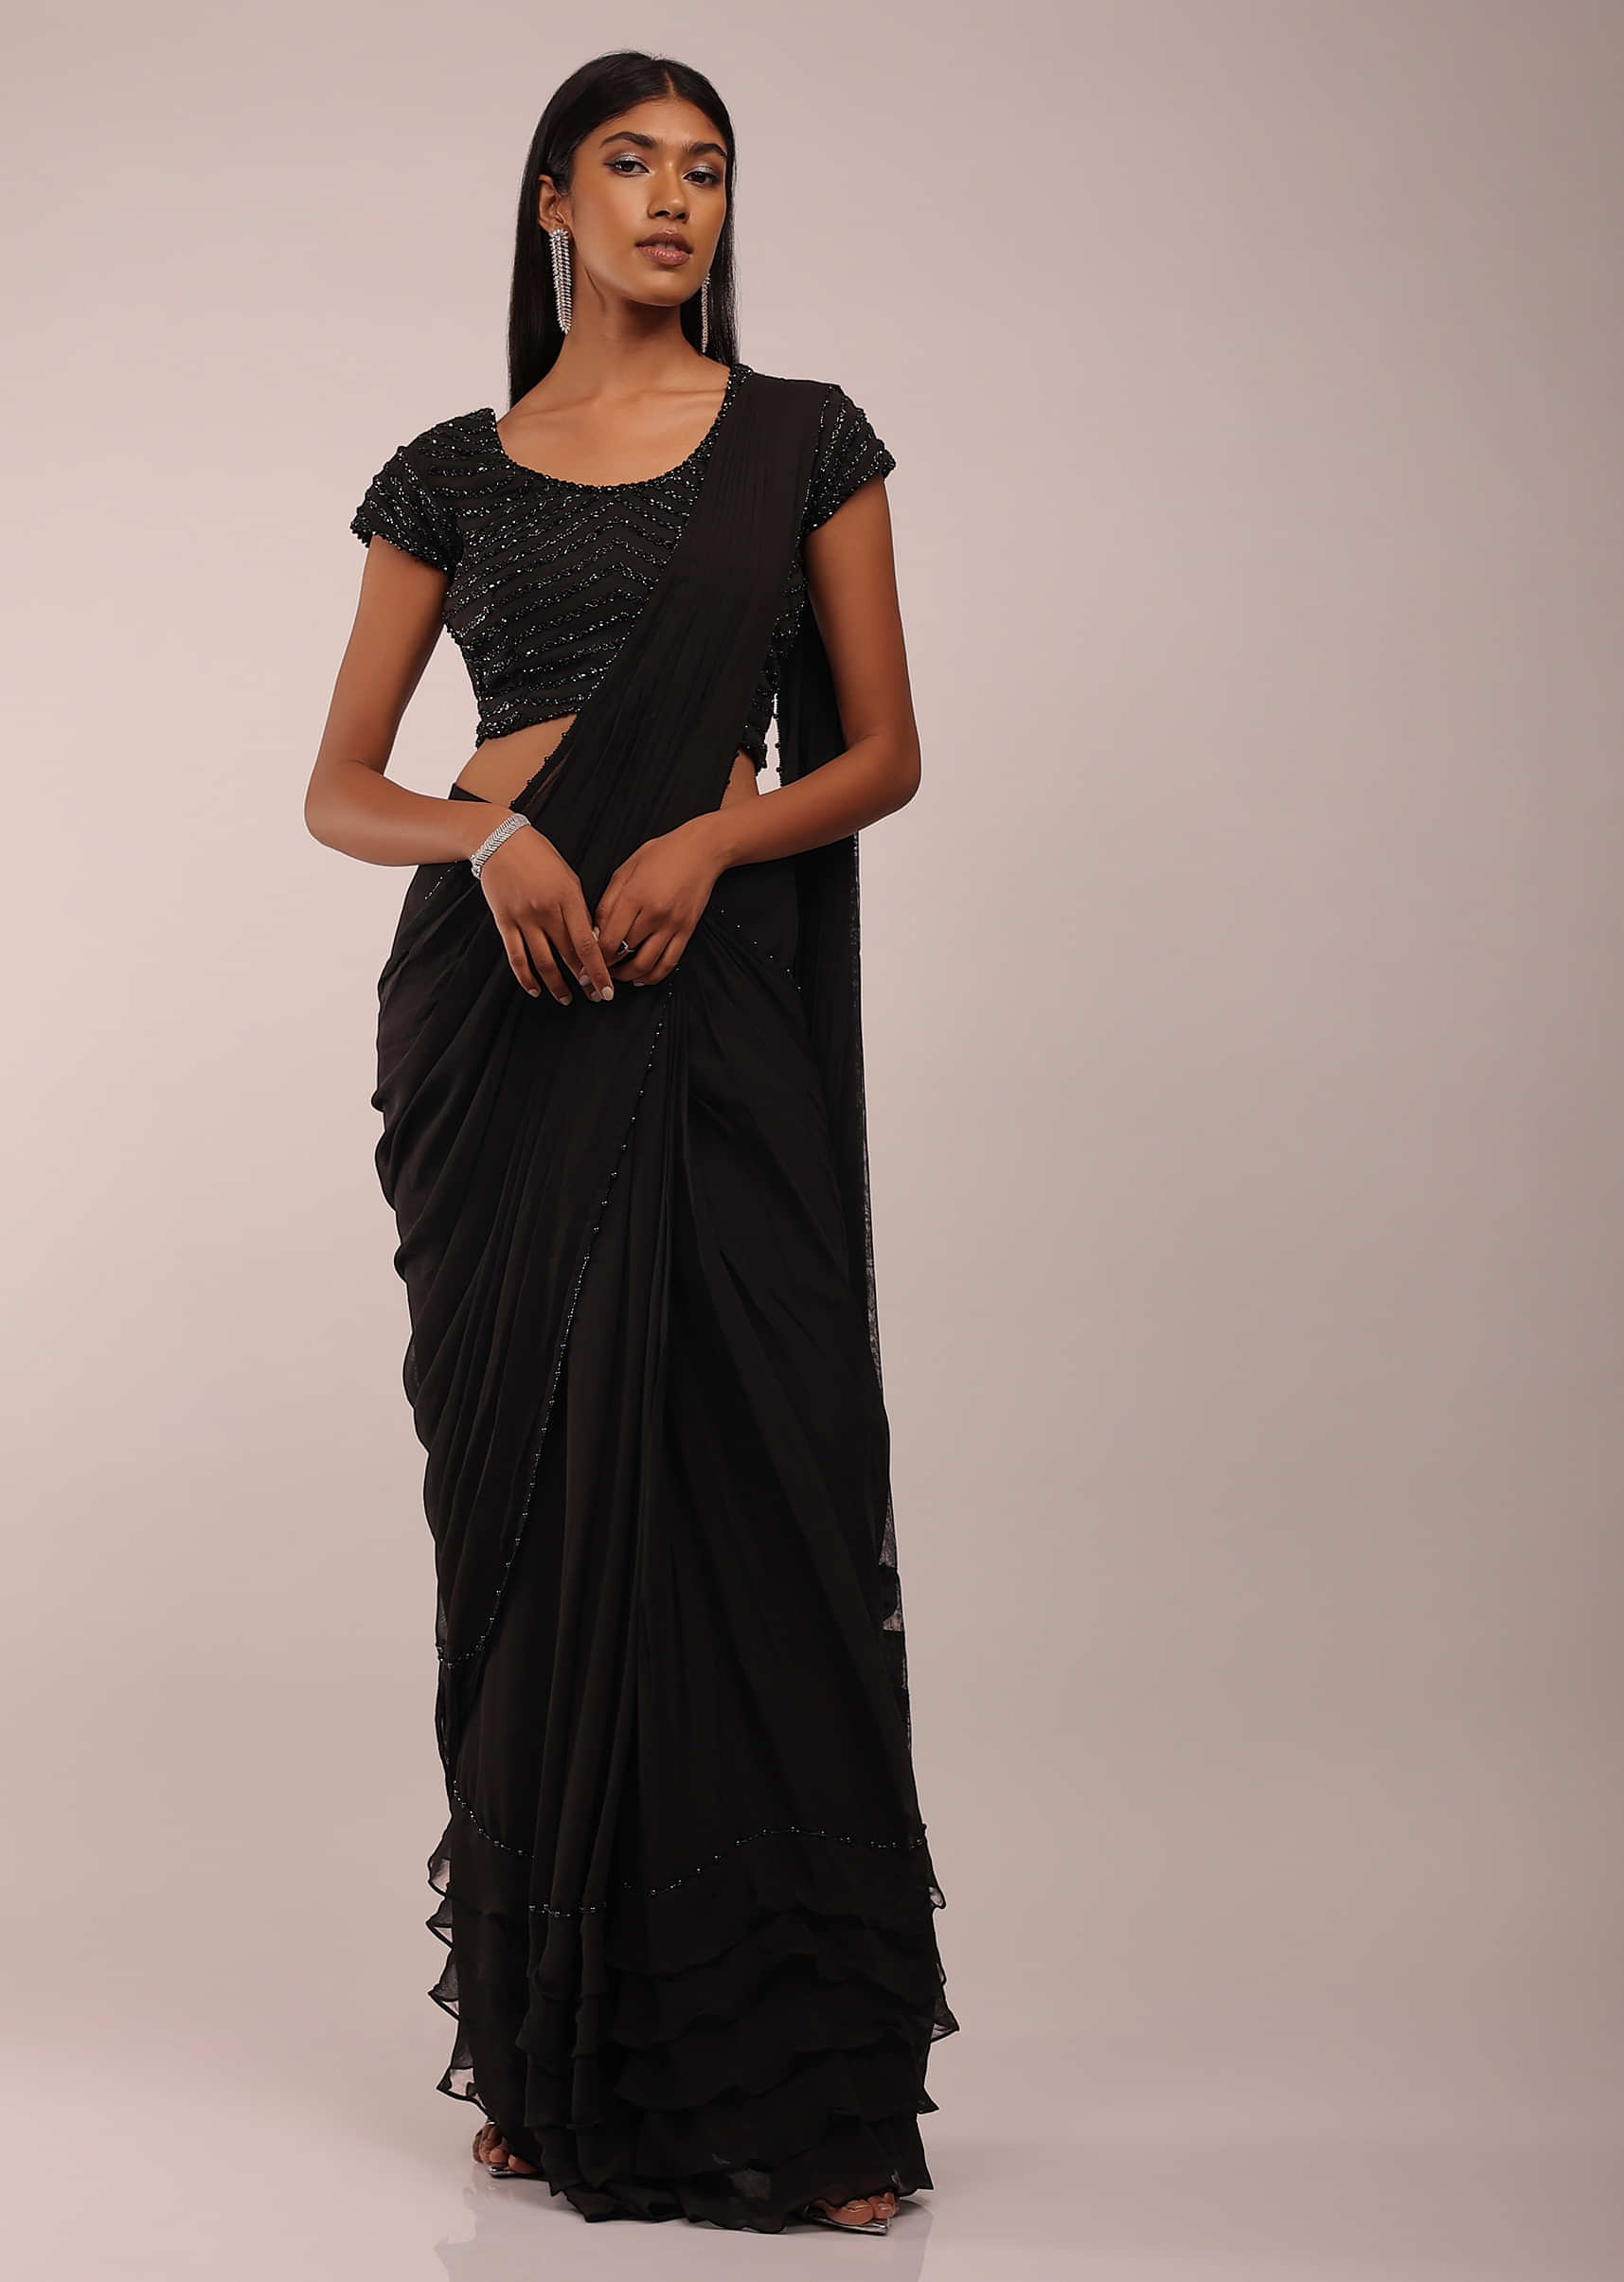 Pitch Black Saree With Three Tones Of Layered Frills On The Bottom Embellished In Stones And Sequins With A Tassel On The Pallu Corner